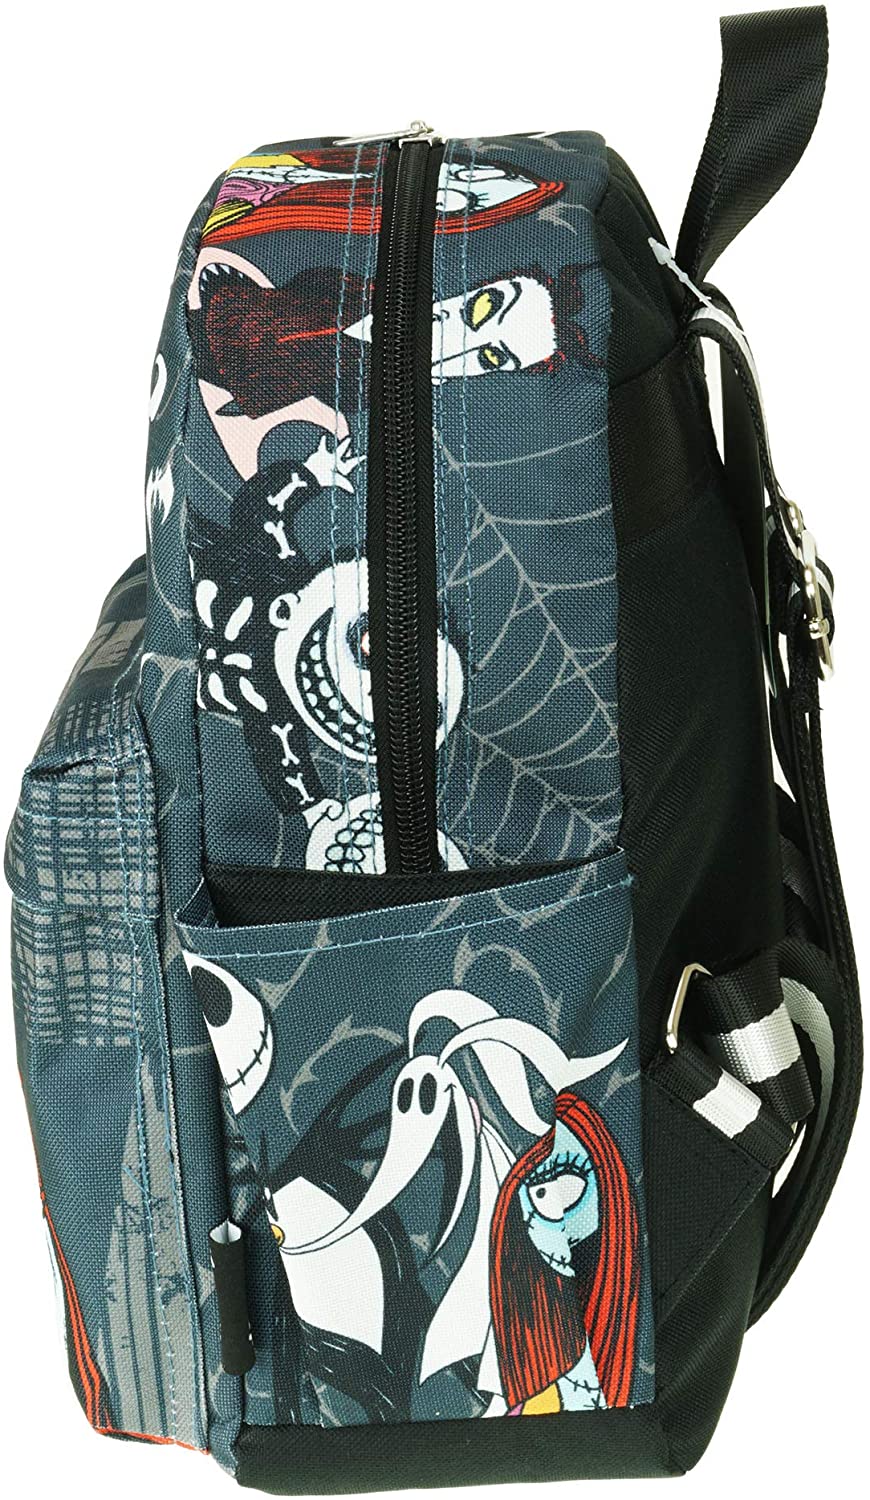 Nightmare Before Christmas 12" Deluxe Oversize Print Daypack - A21333 - GTE Zone